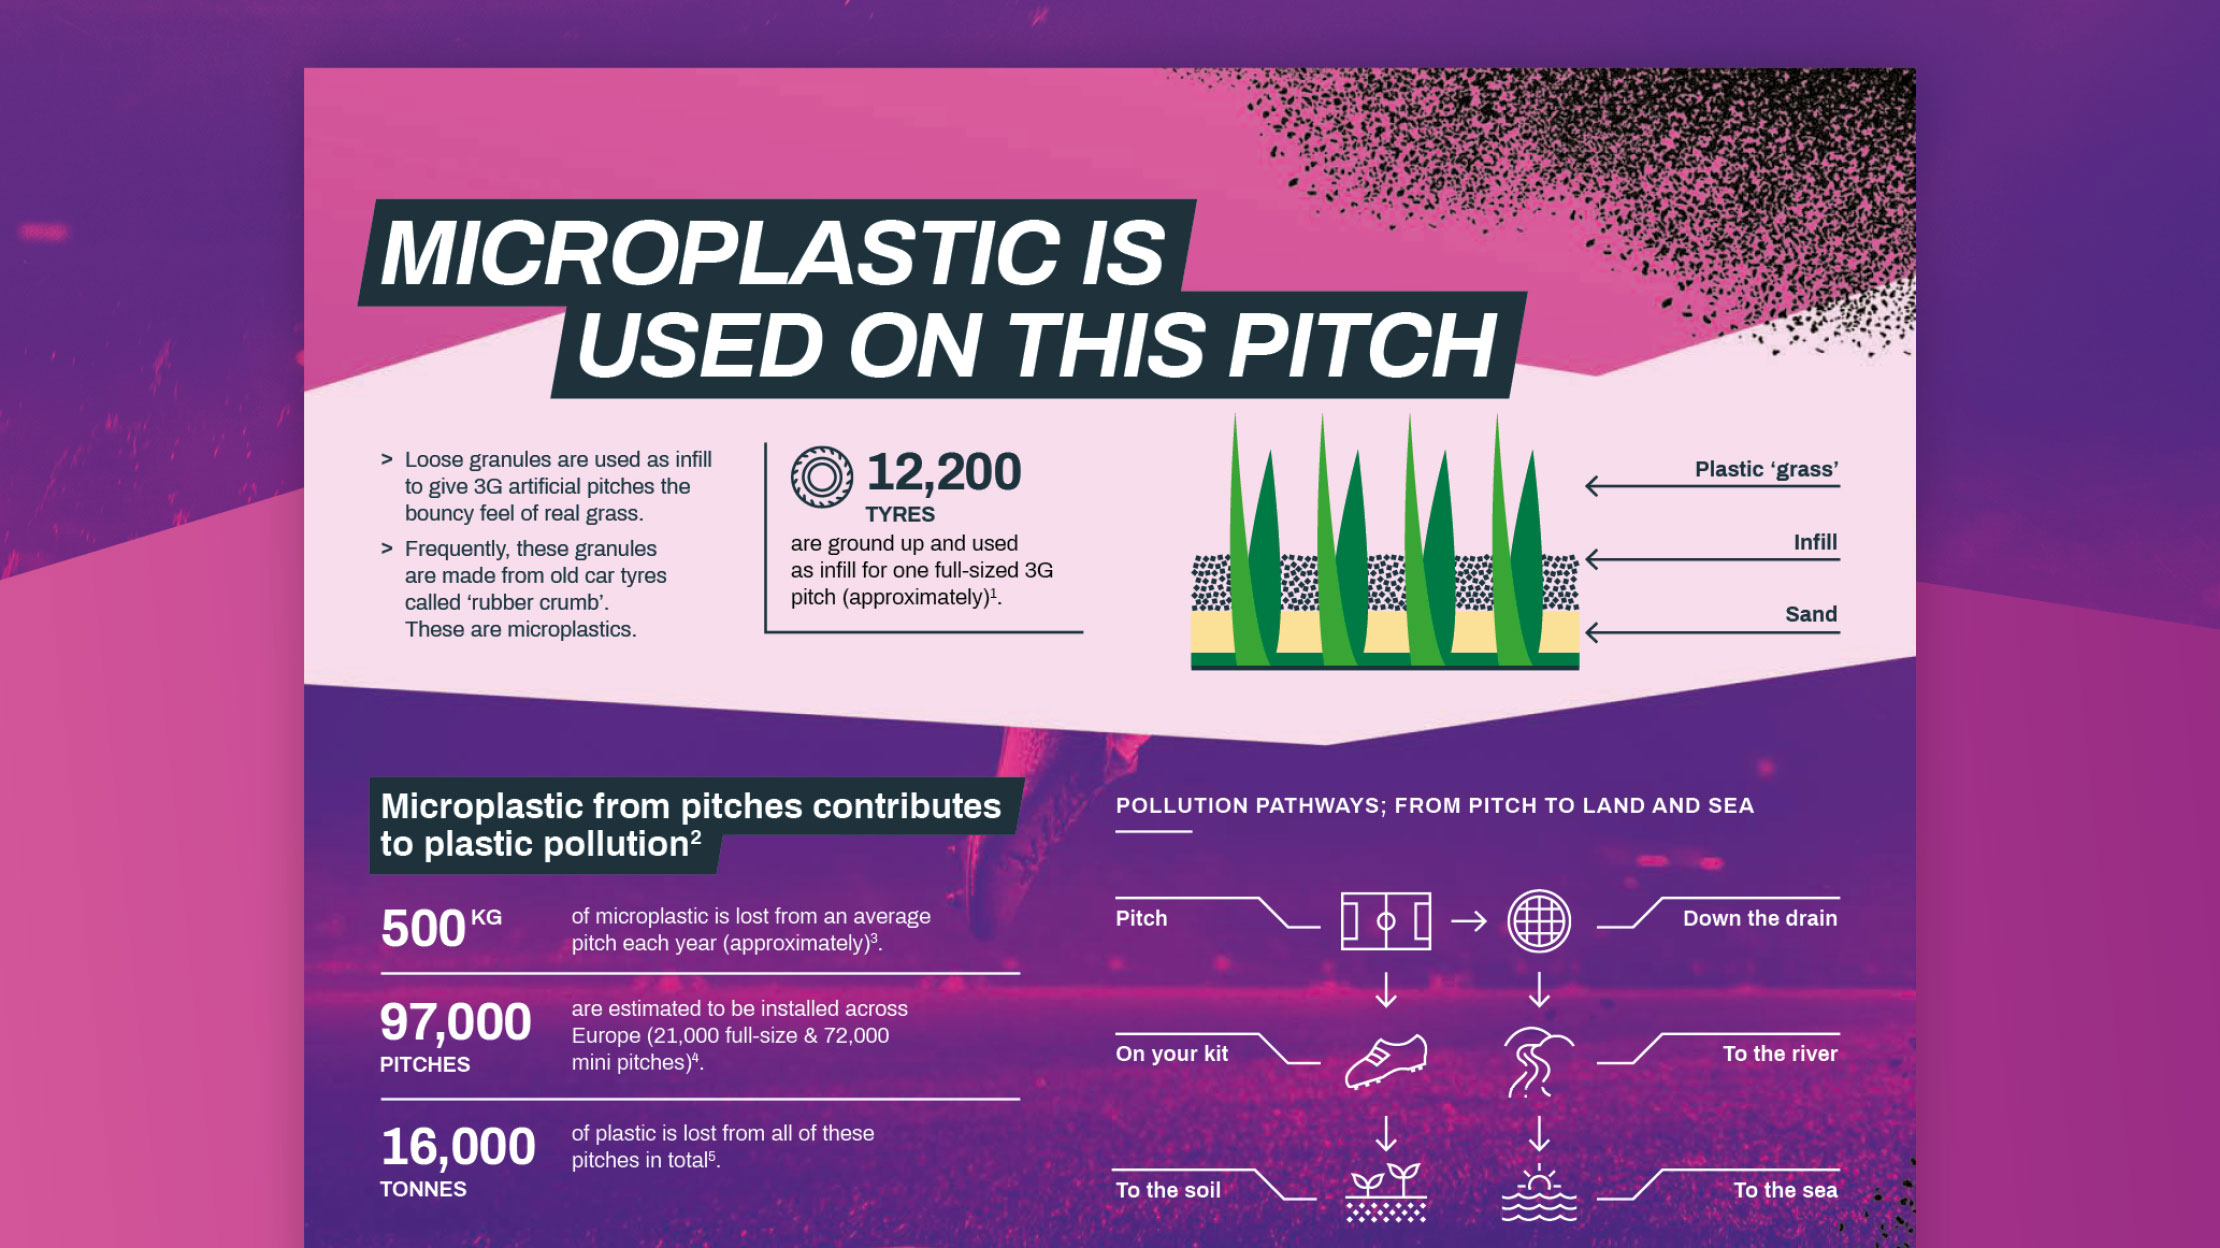 Infographic caption "Microplastic is used on this pitch".